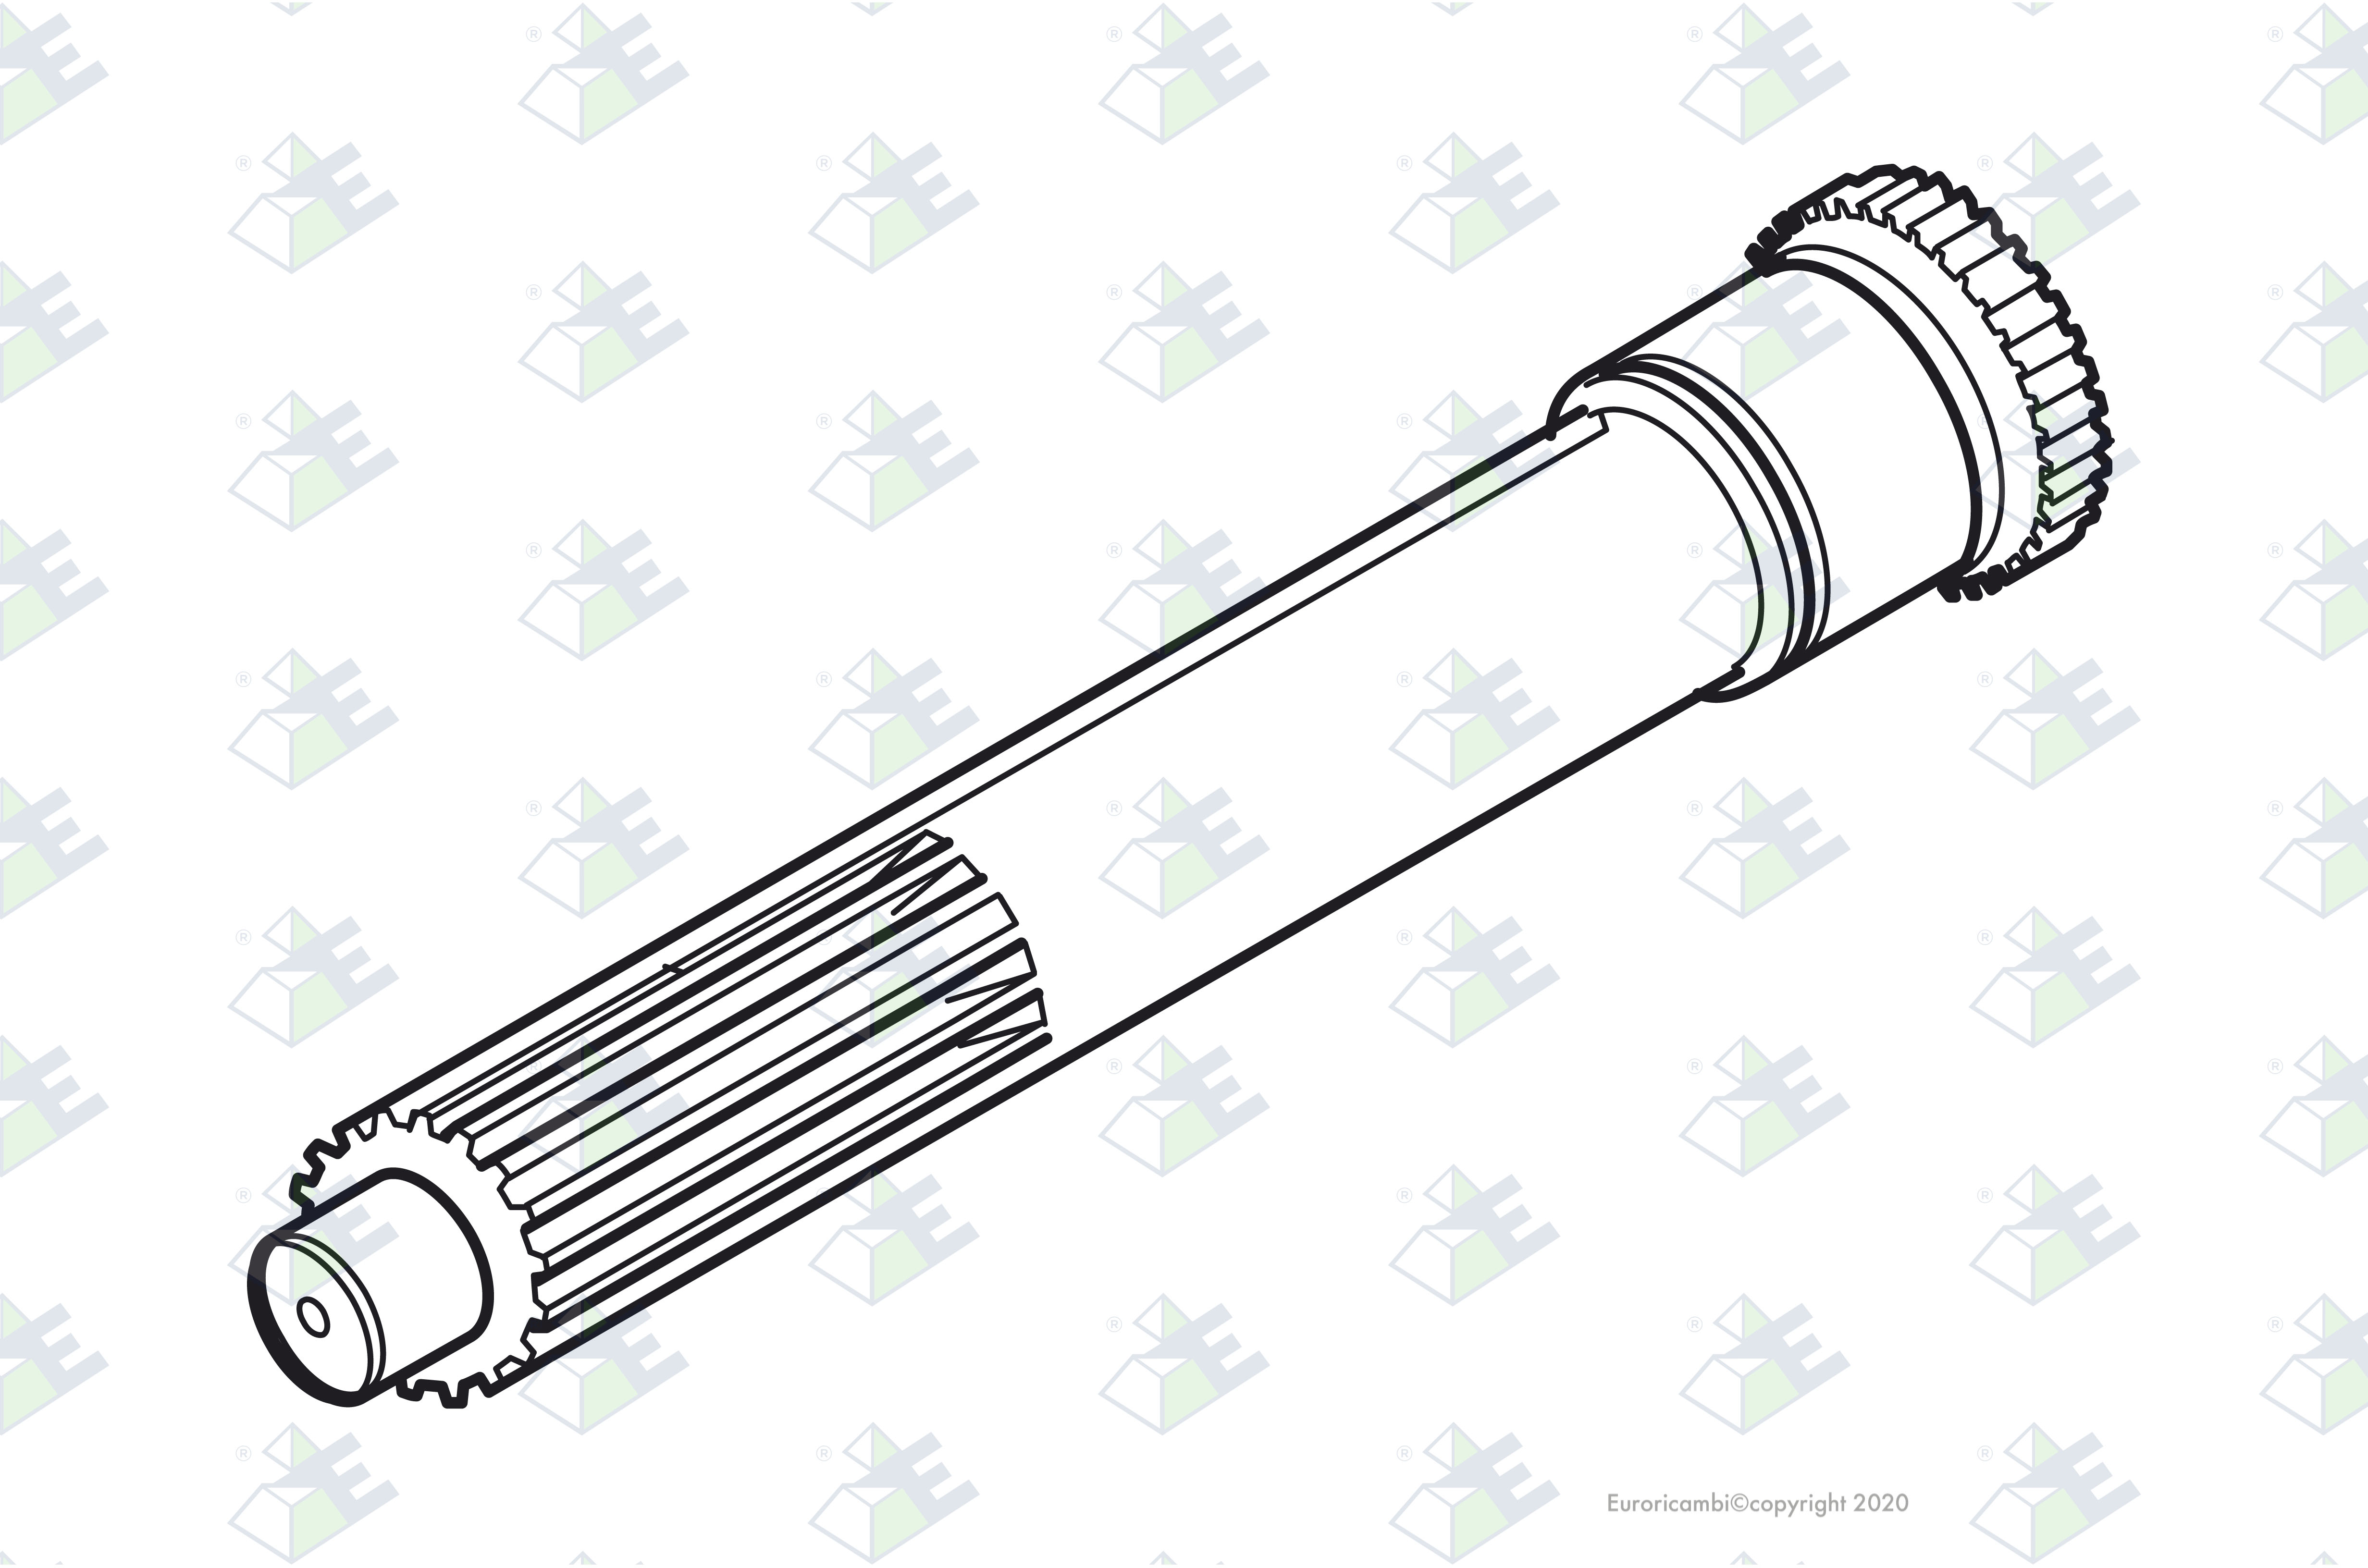 INPUT SHAFT 2"X12,12" suitable to AM GEARS 35233